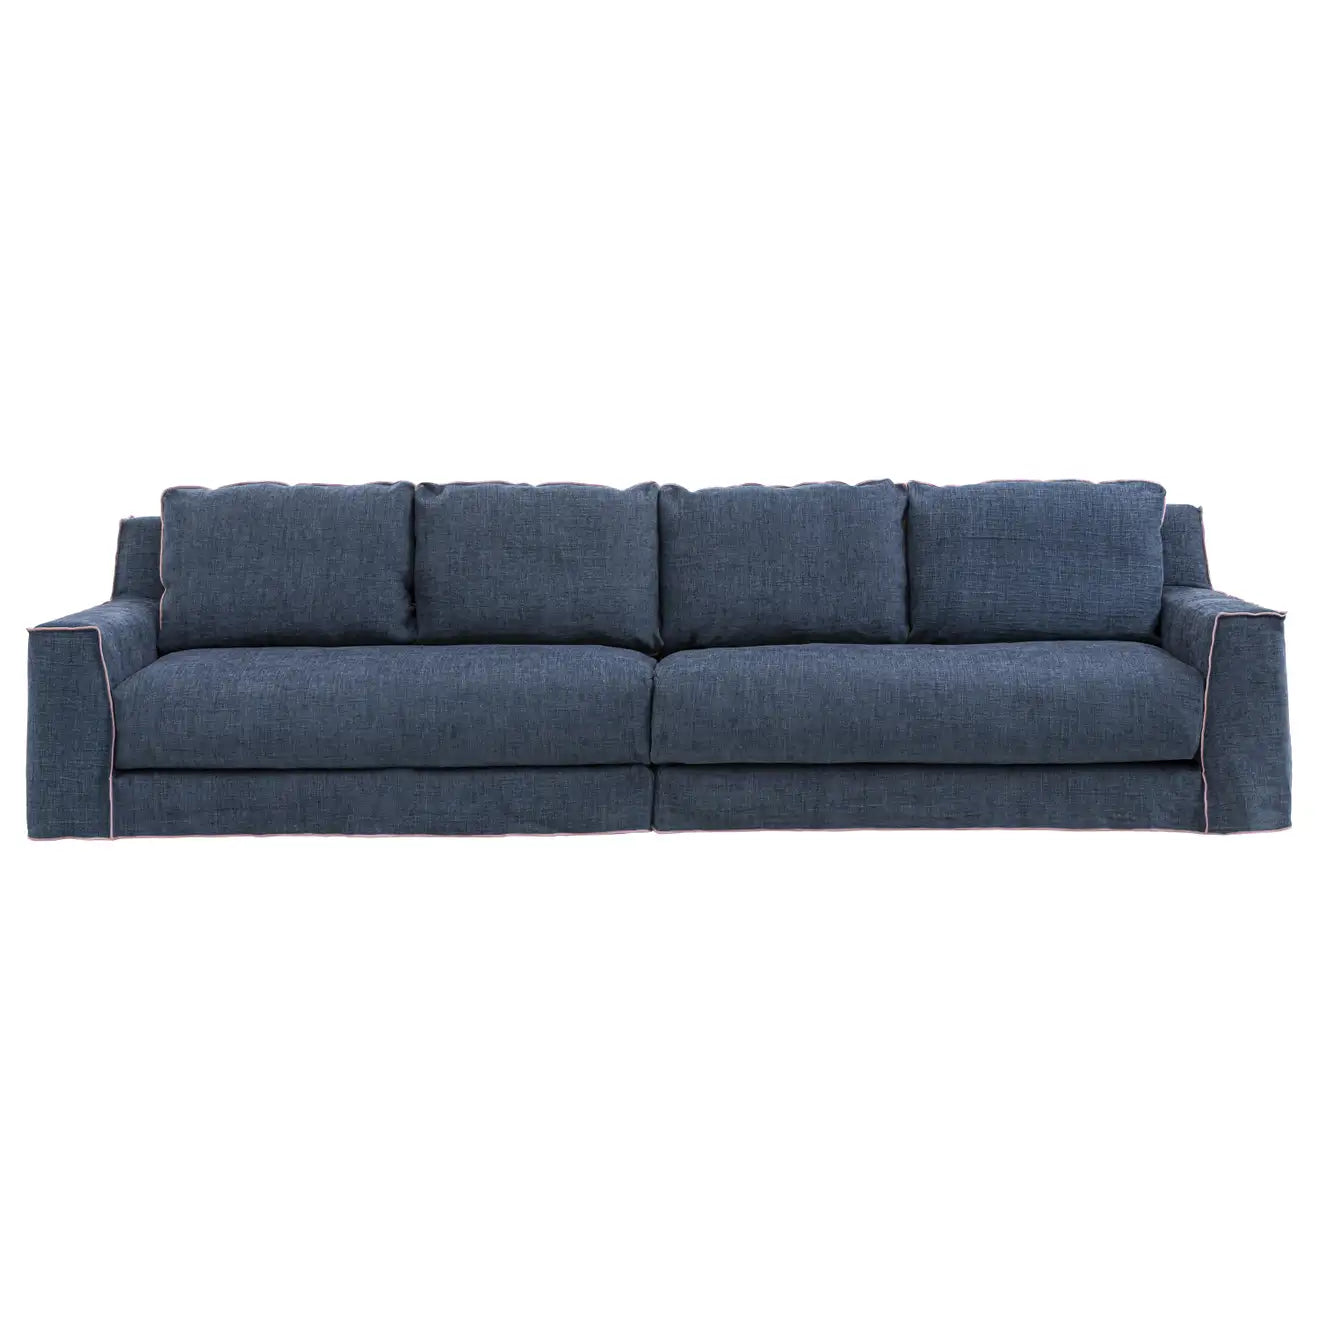 Gervasoni Loll 3 Modular Sofa in Munch Upholstery by Paola Navone $11,100.00